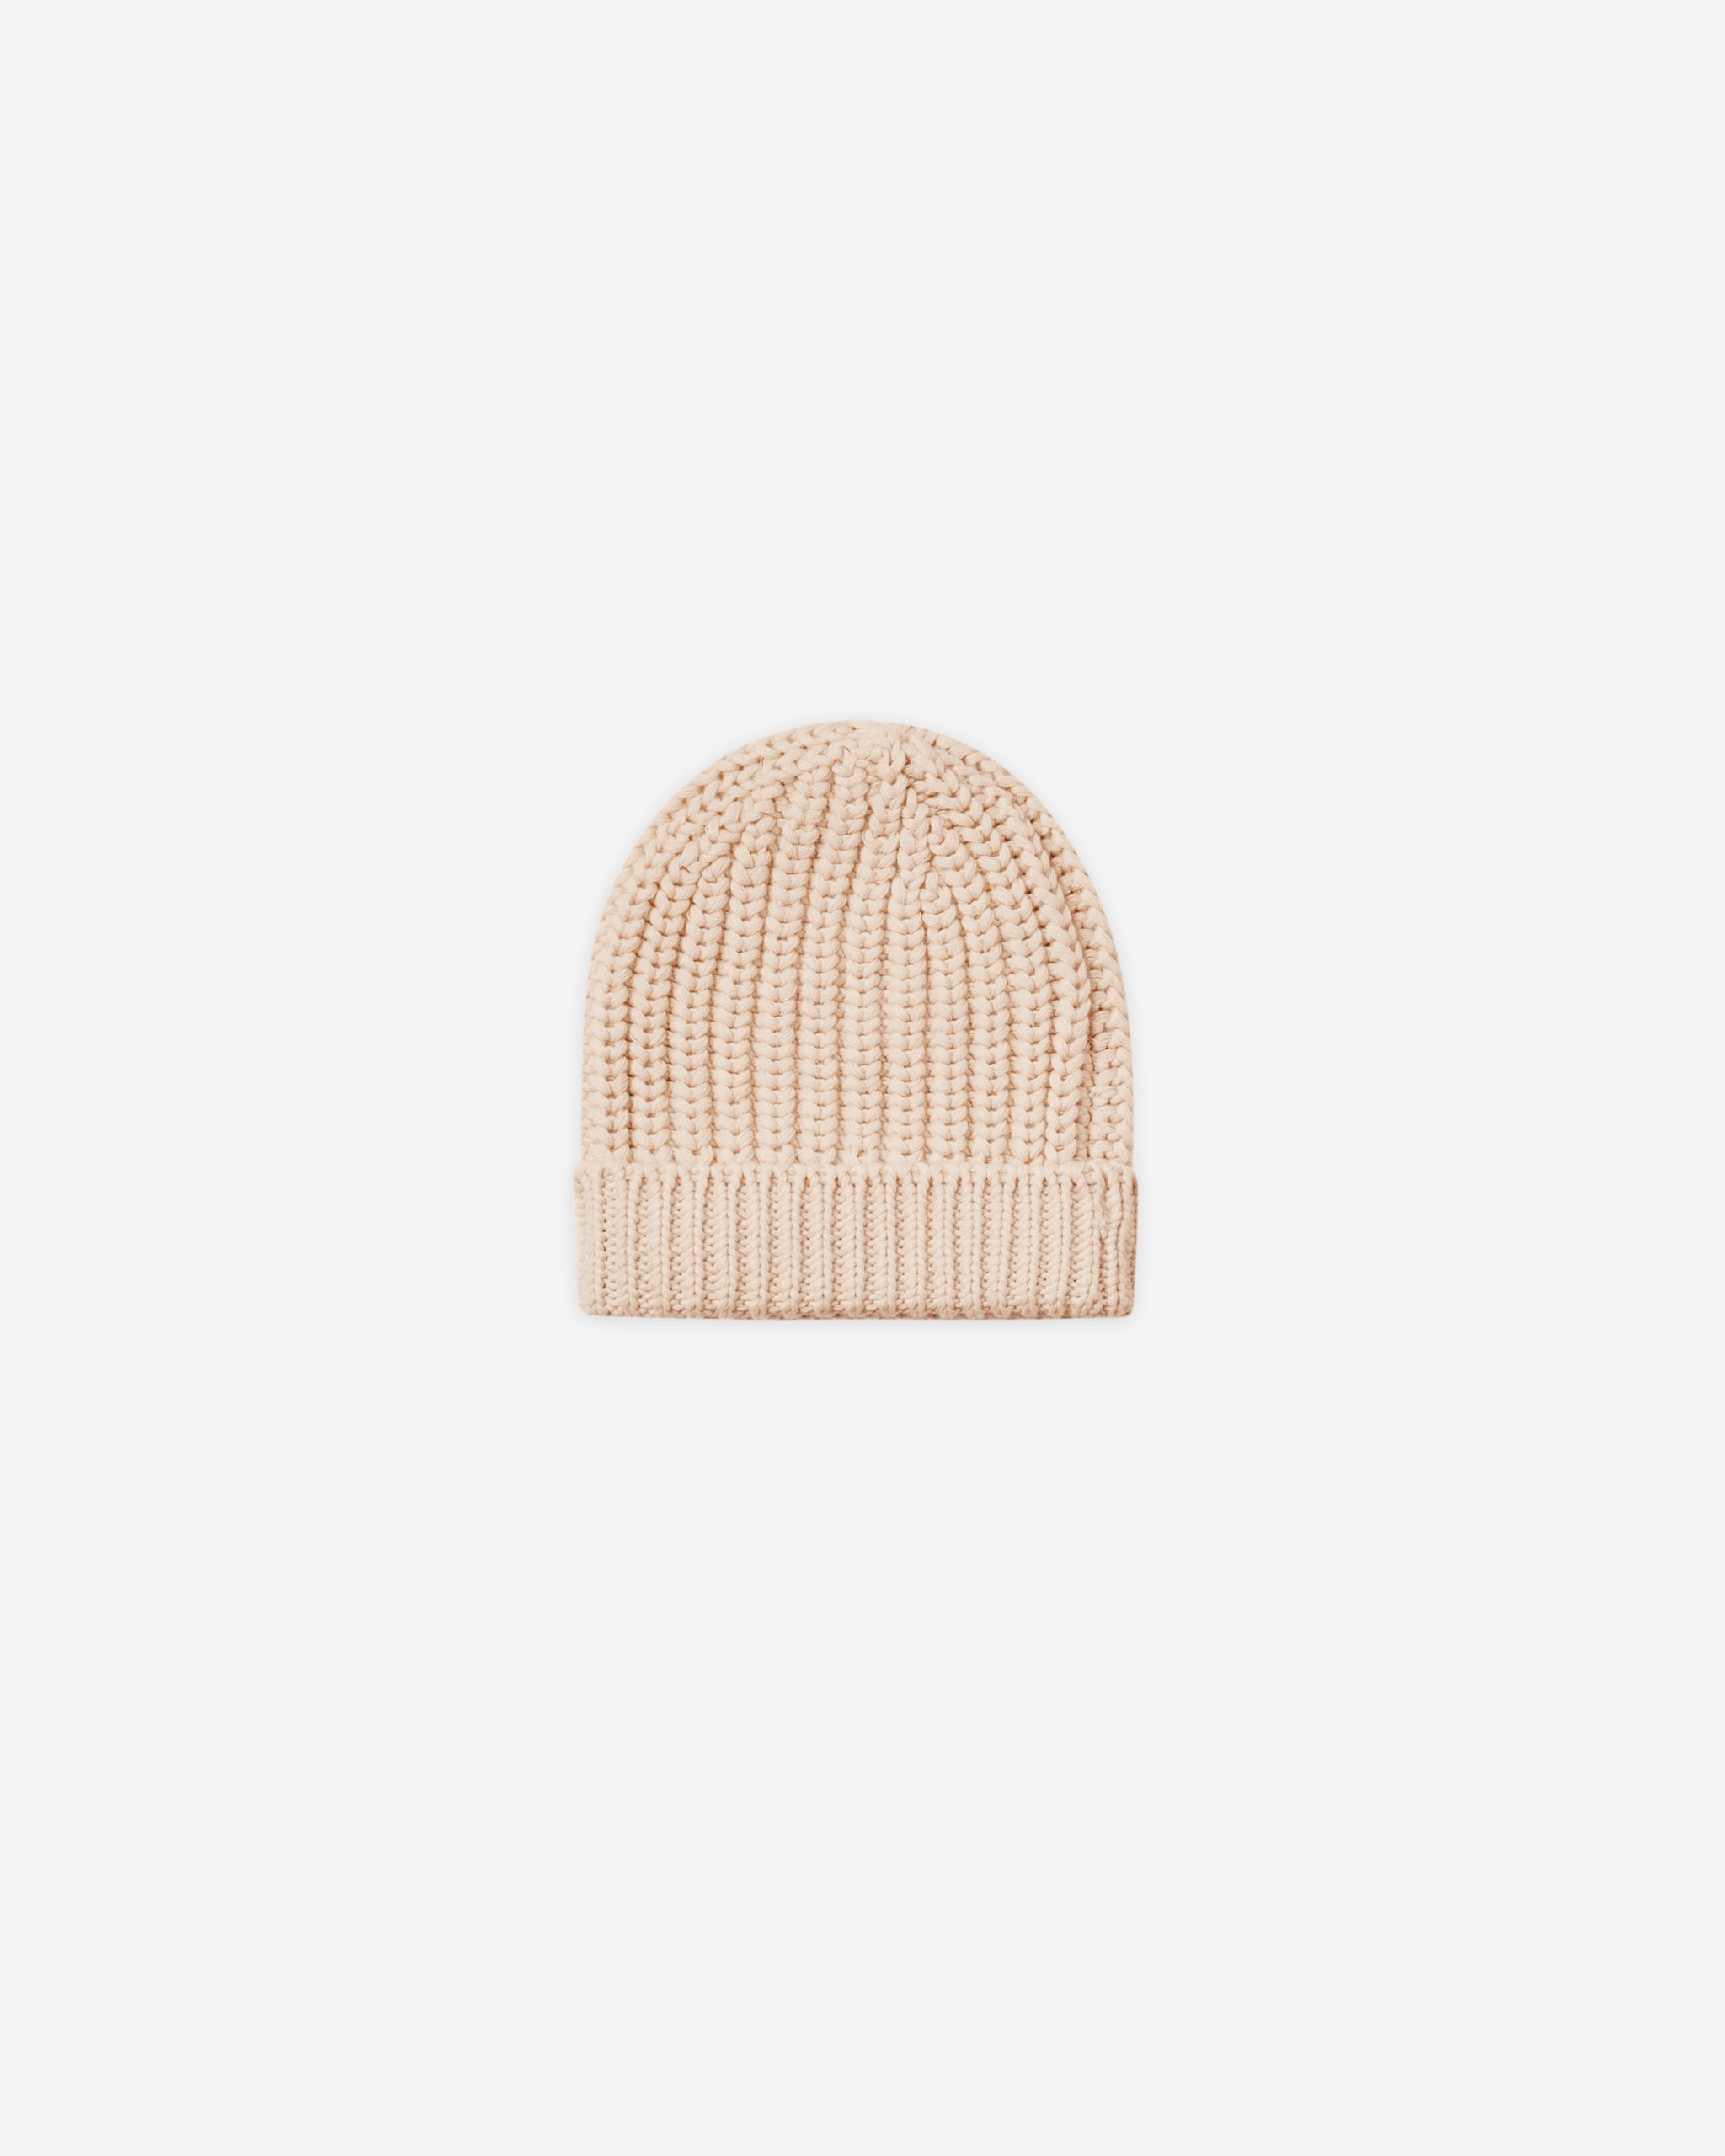 Beanie || Shell - Rylee + Cru | Kids Clothes | Trendy Baby Clothes | Modern Infant Outfits |